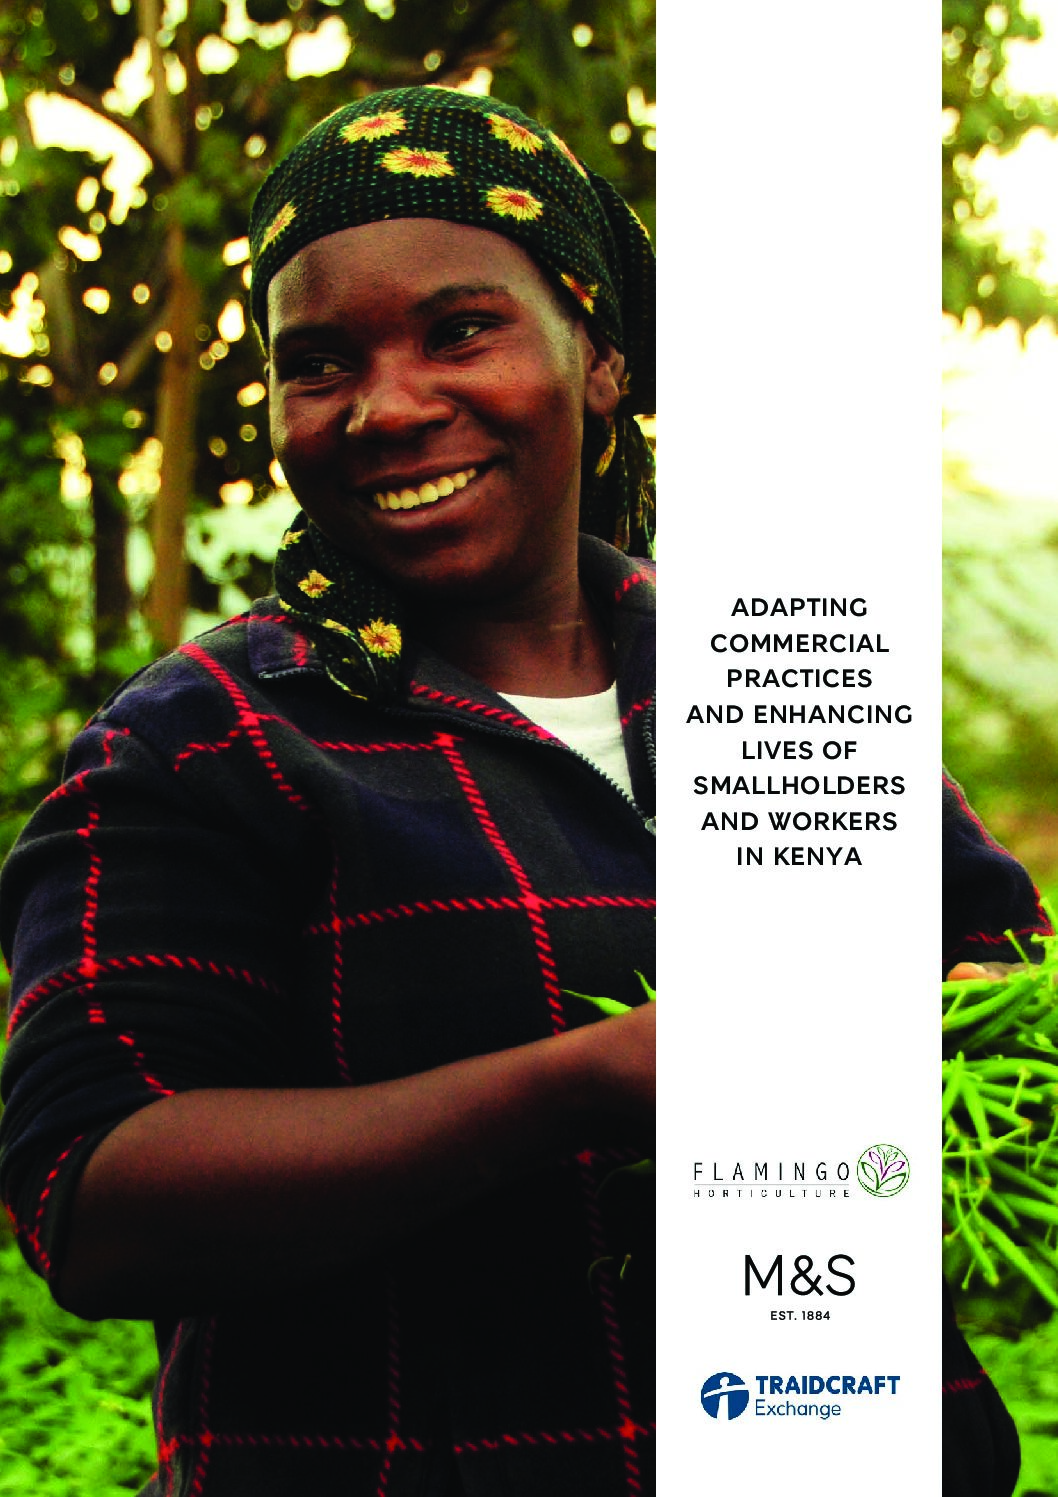 Adapting commercial practices and enhancing lives of smallholders and workers in Kenya